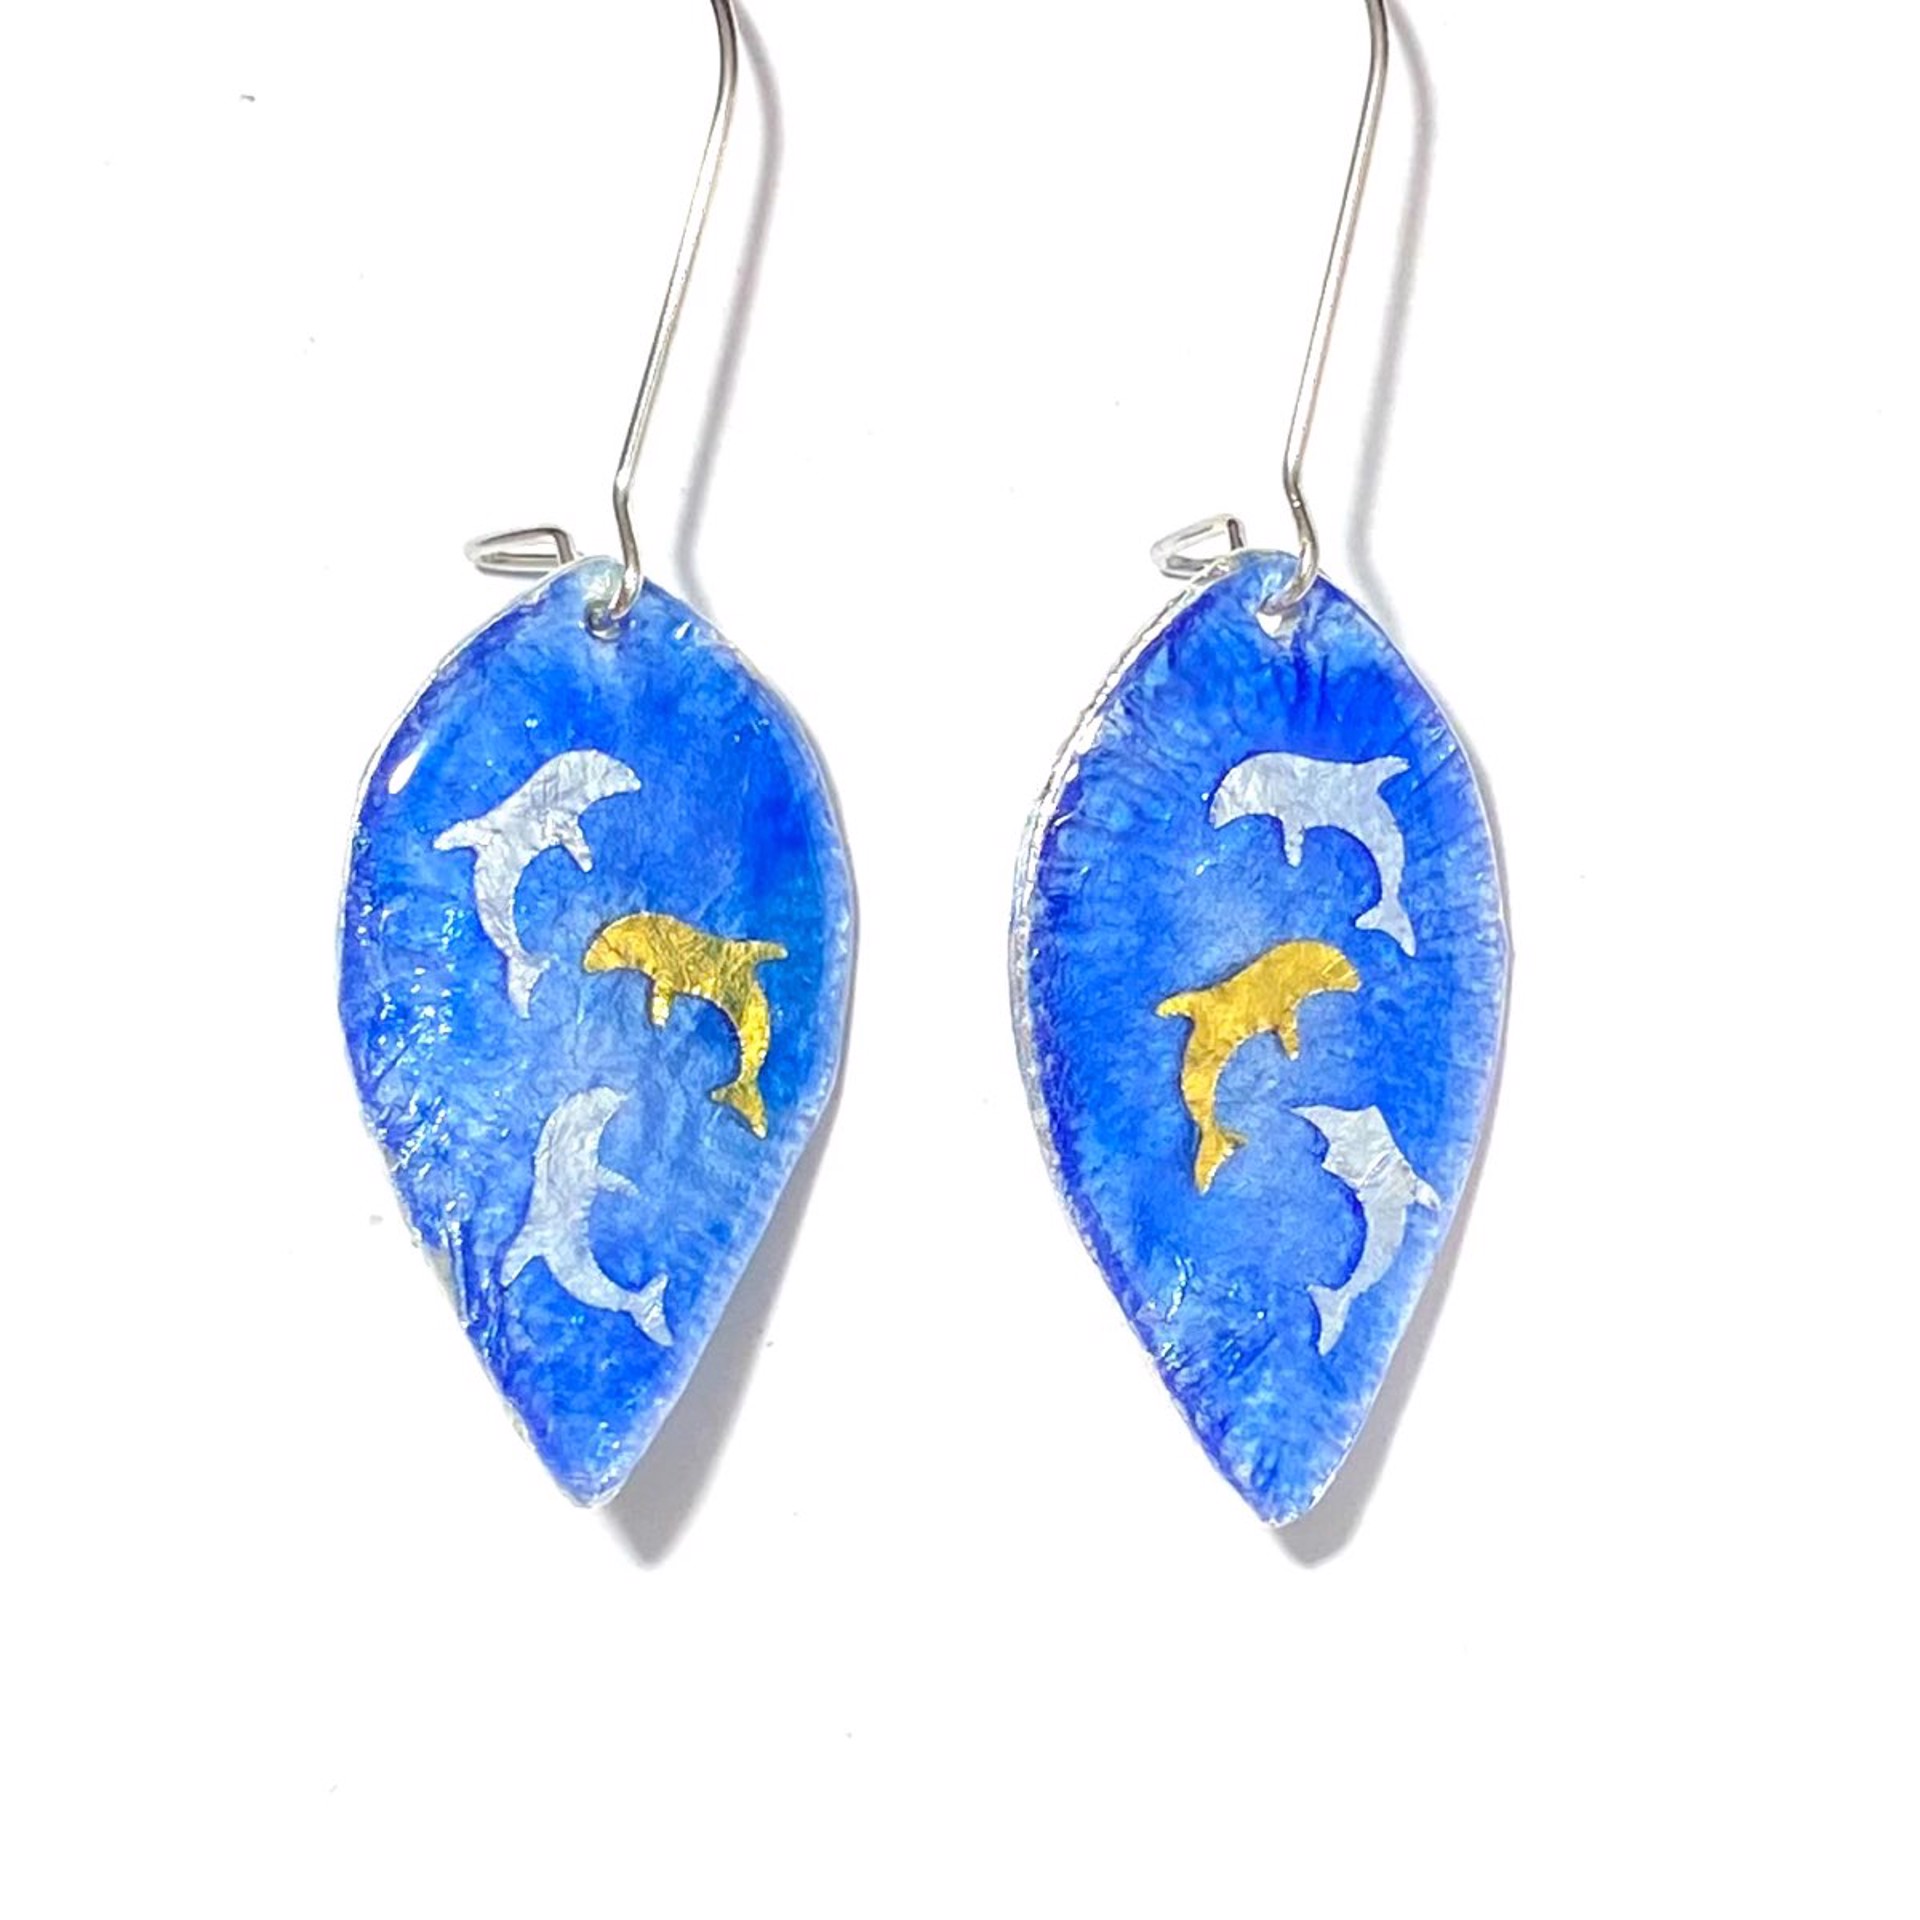 Silver And Gold Dolphins Over Blue Enamel Earrings KH22-53 by Karen Hakim